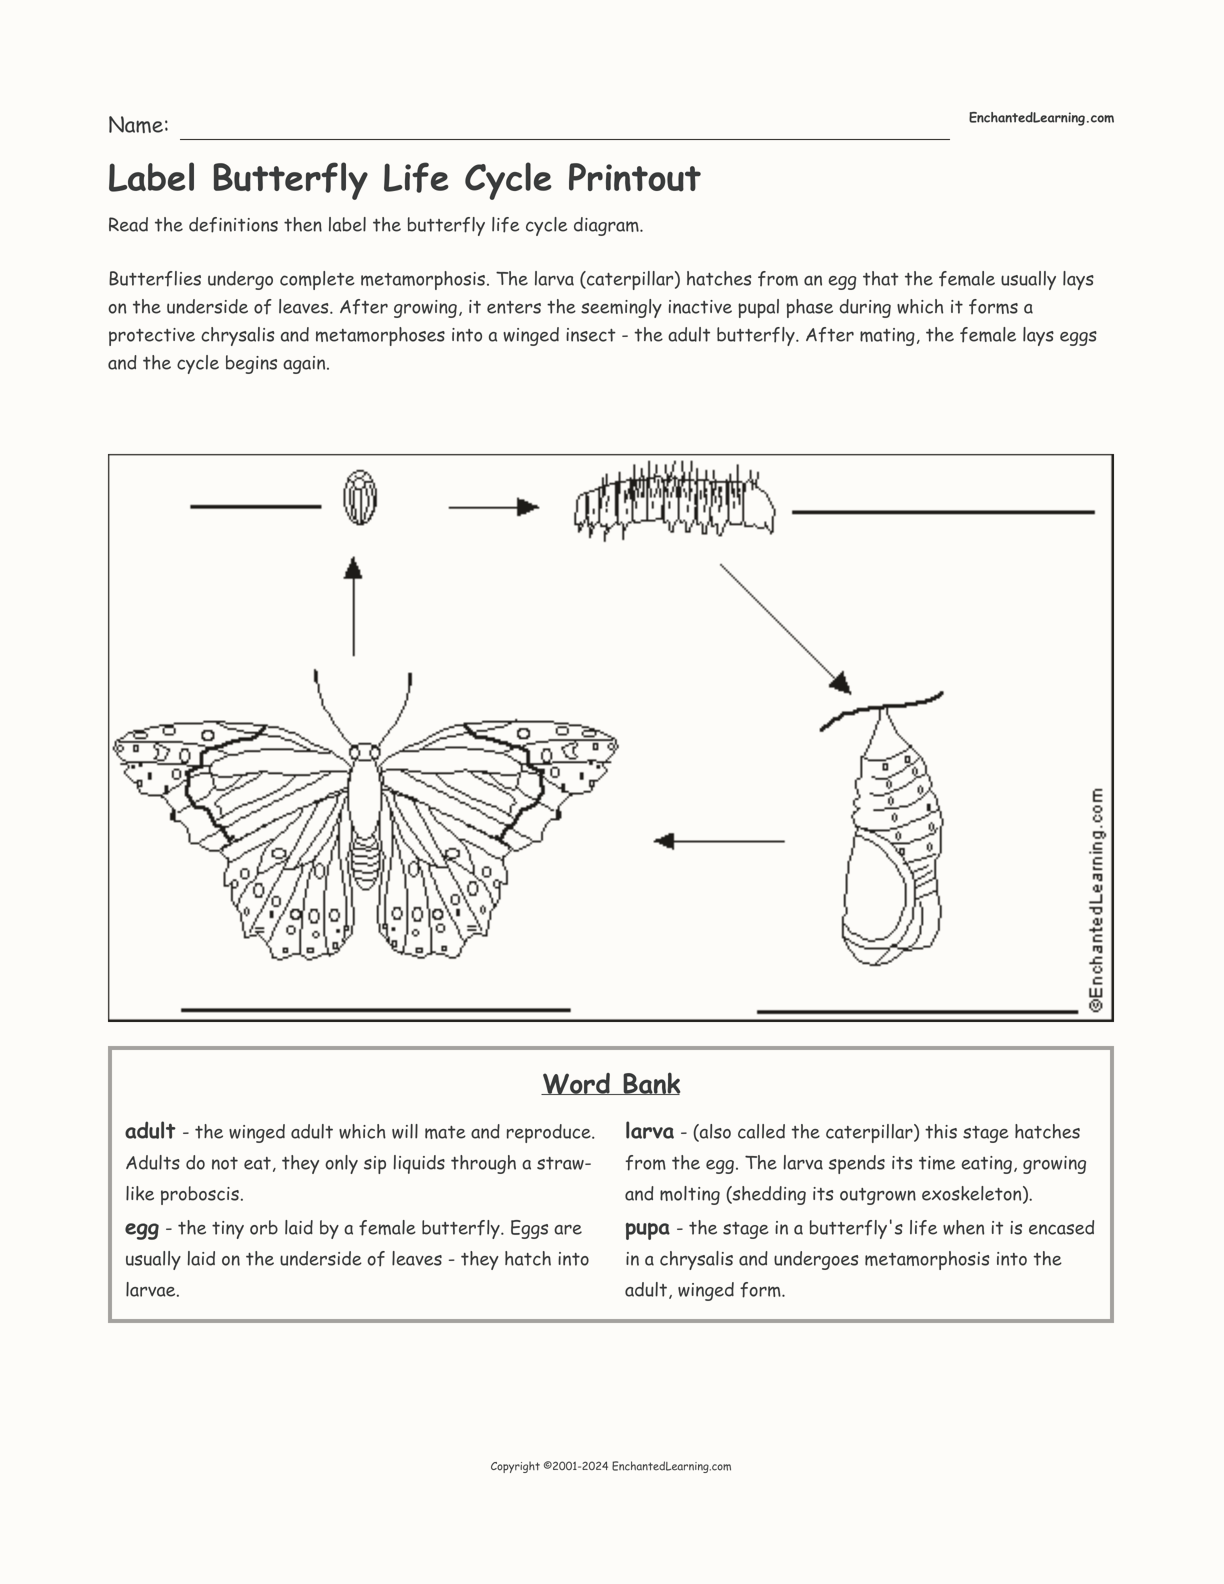 BUTTERFLY PLATE LIFE CYCLE | DIY BOSTIK